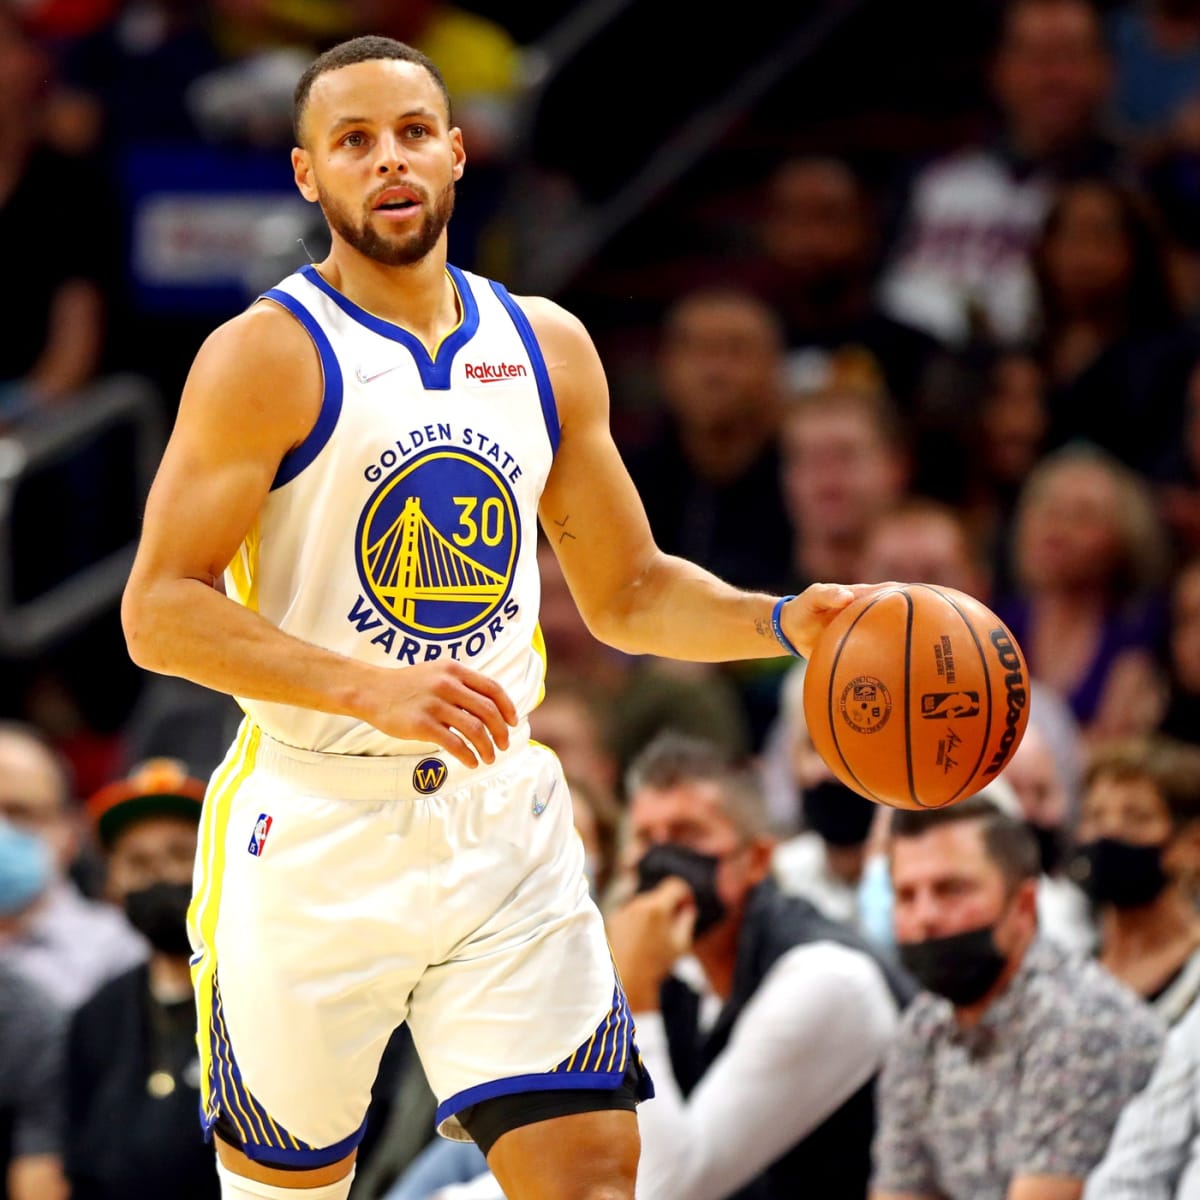 Steph Curry explodes for 50 points but Golden State Warriors still beaten  130-119 by Phoenix Suns